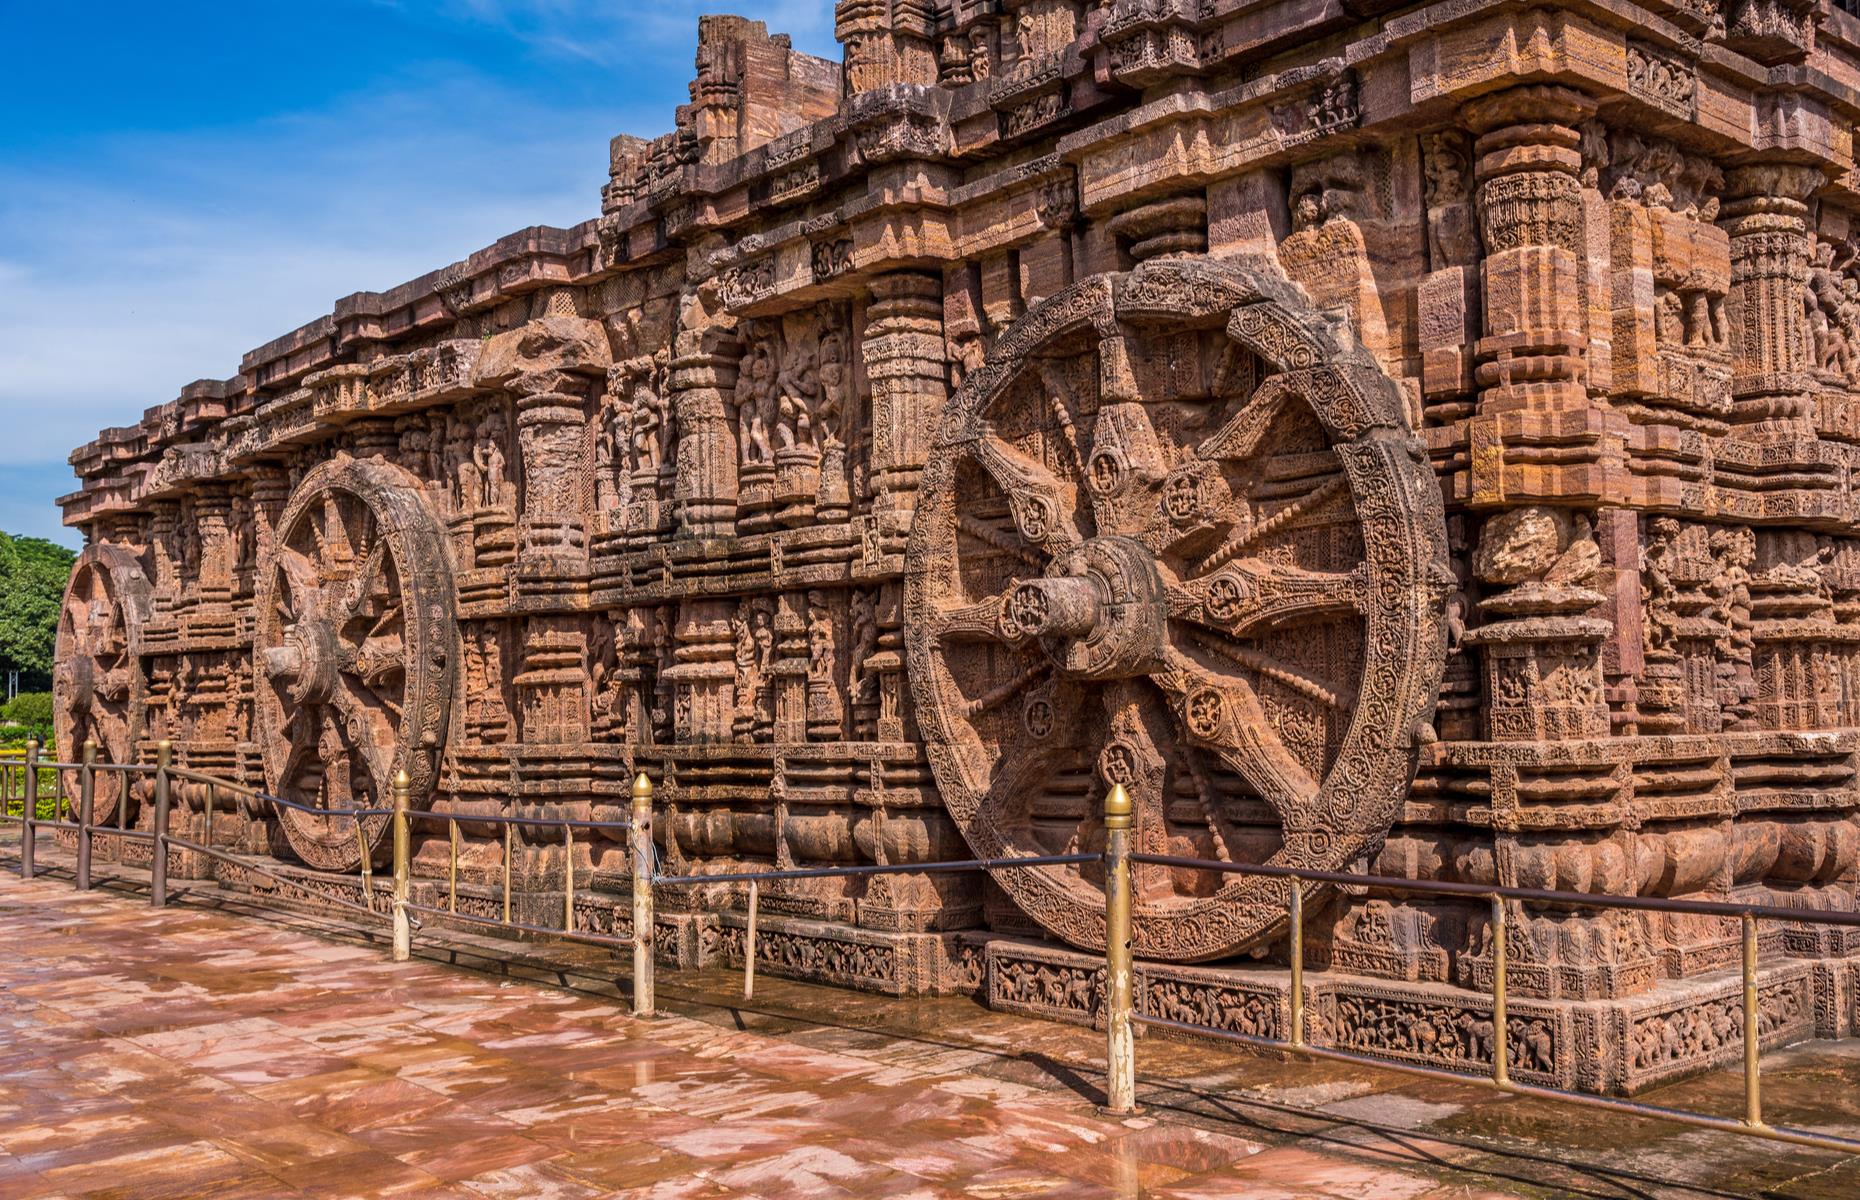 <p>The colossal, chariot-shaped temple was built by 13th-century King Narasimhadeva to carry the sun god Surya across the heavens. Complete with enormous intricately-carved wheels and horses, this is one of India's most famous Brahman temples.</p>  <p>The wheels are thought to have been used as ancient sundials. Keep a look out for some eye-opening wall carvings.</p>